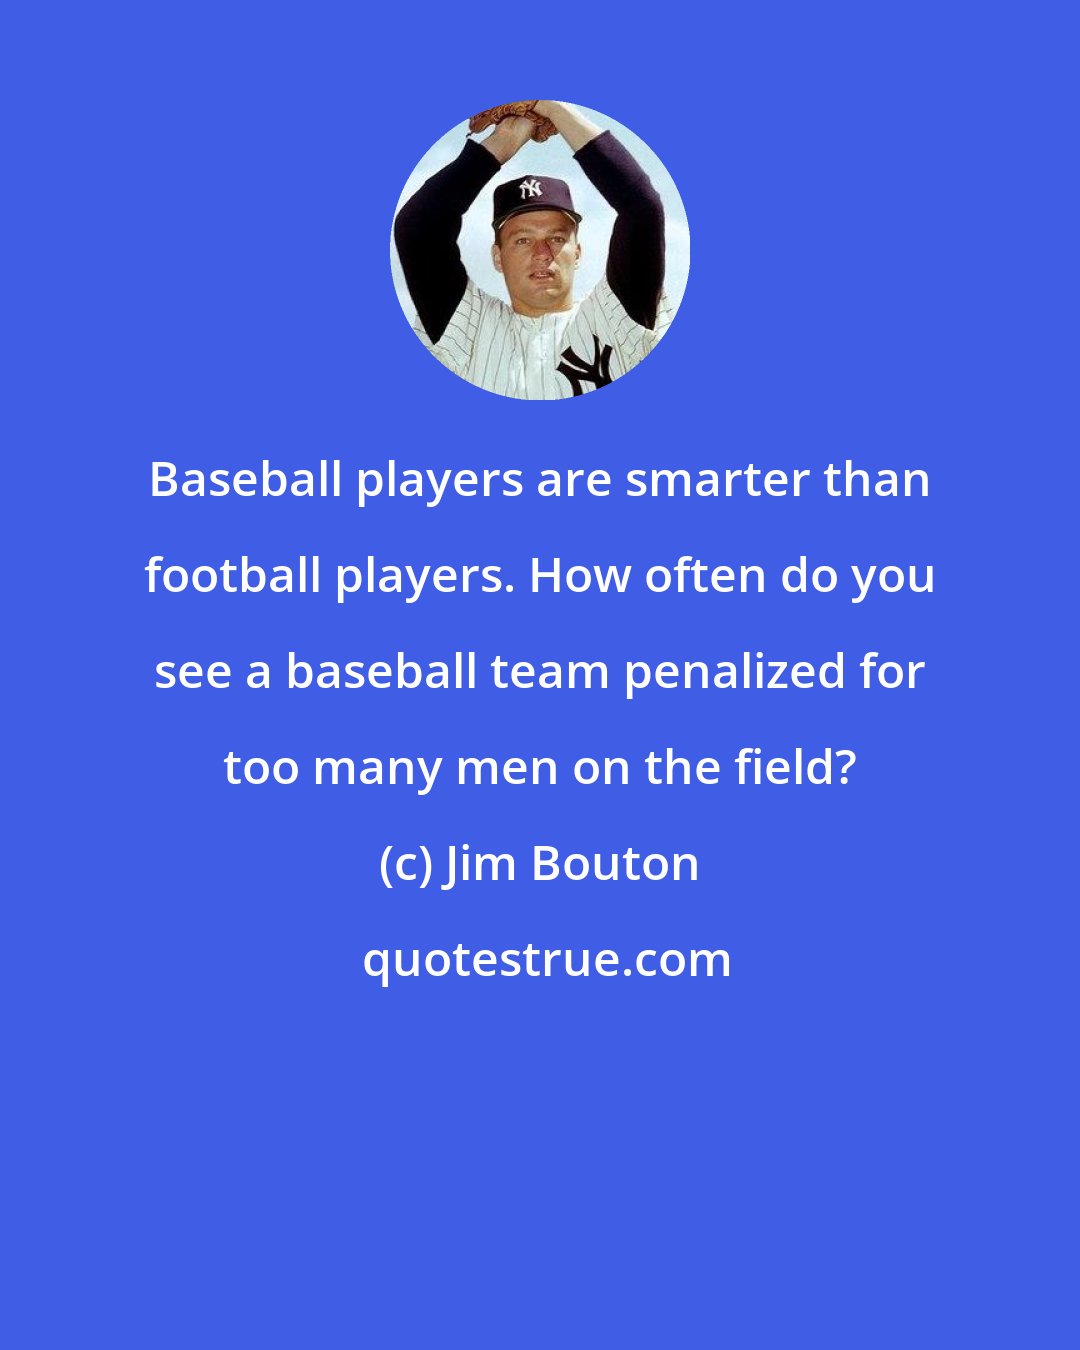 Jim Bouton: Baseball players are smarter than football players. How often do you see a baseball team penalized for too many men on the field?